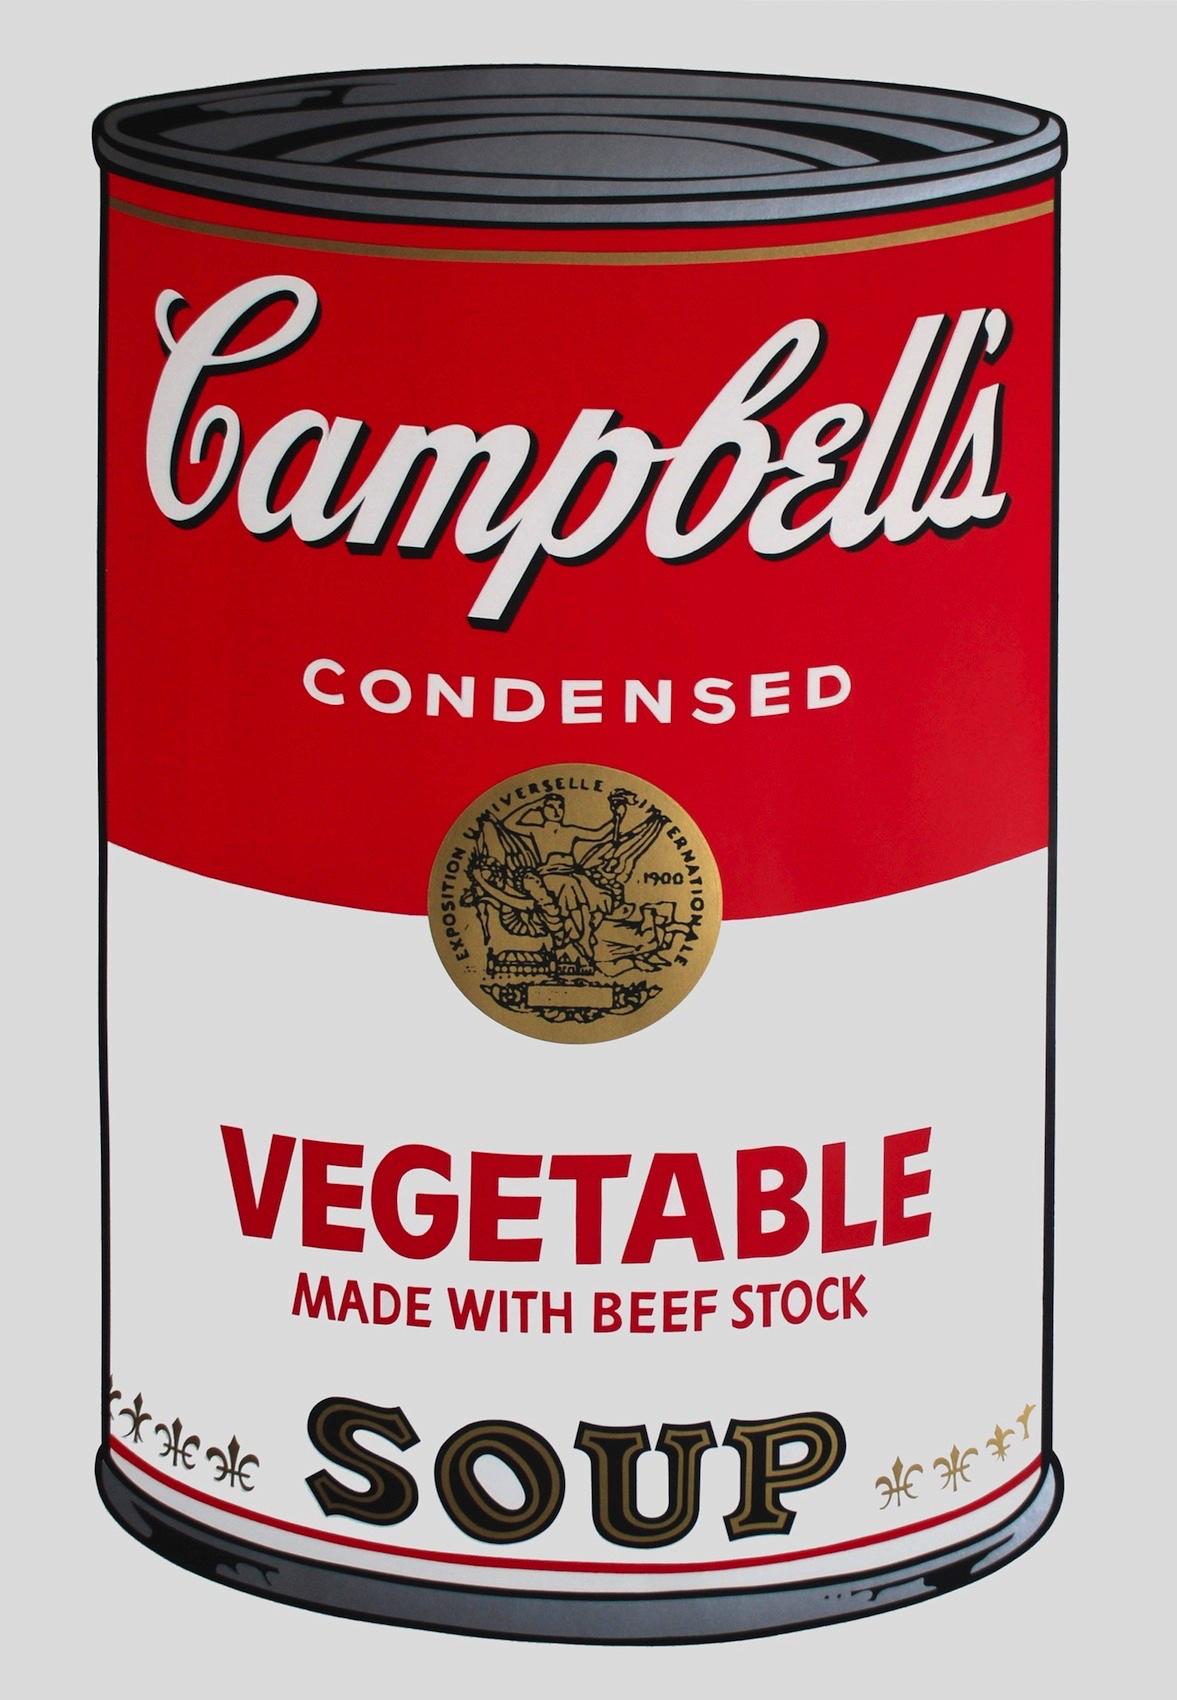 Campbell's Soup: Vegetable (FS II.48) - Print by Andy Warhol